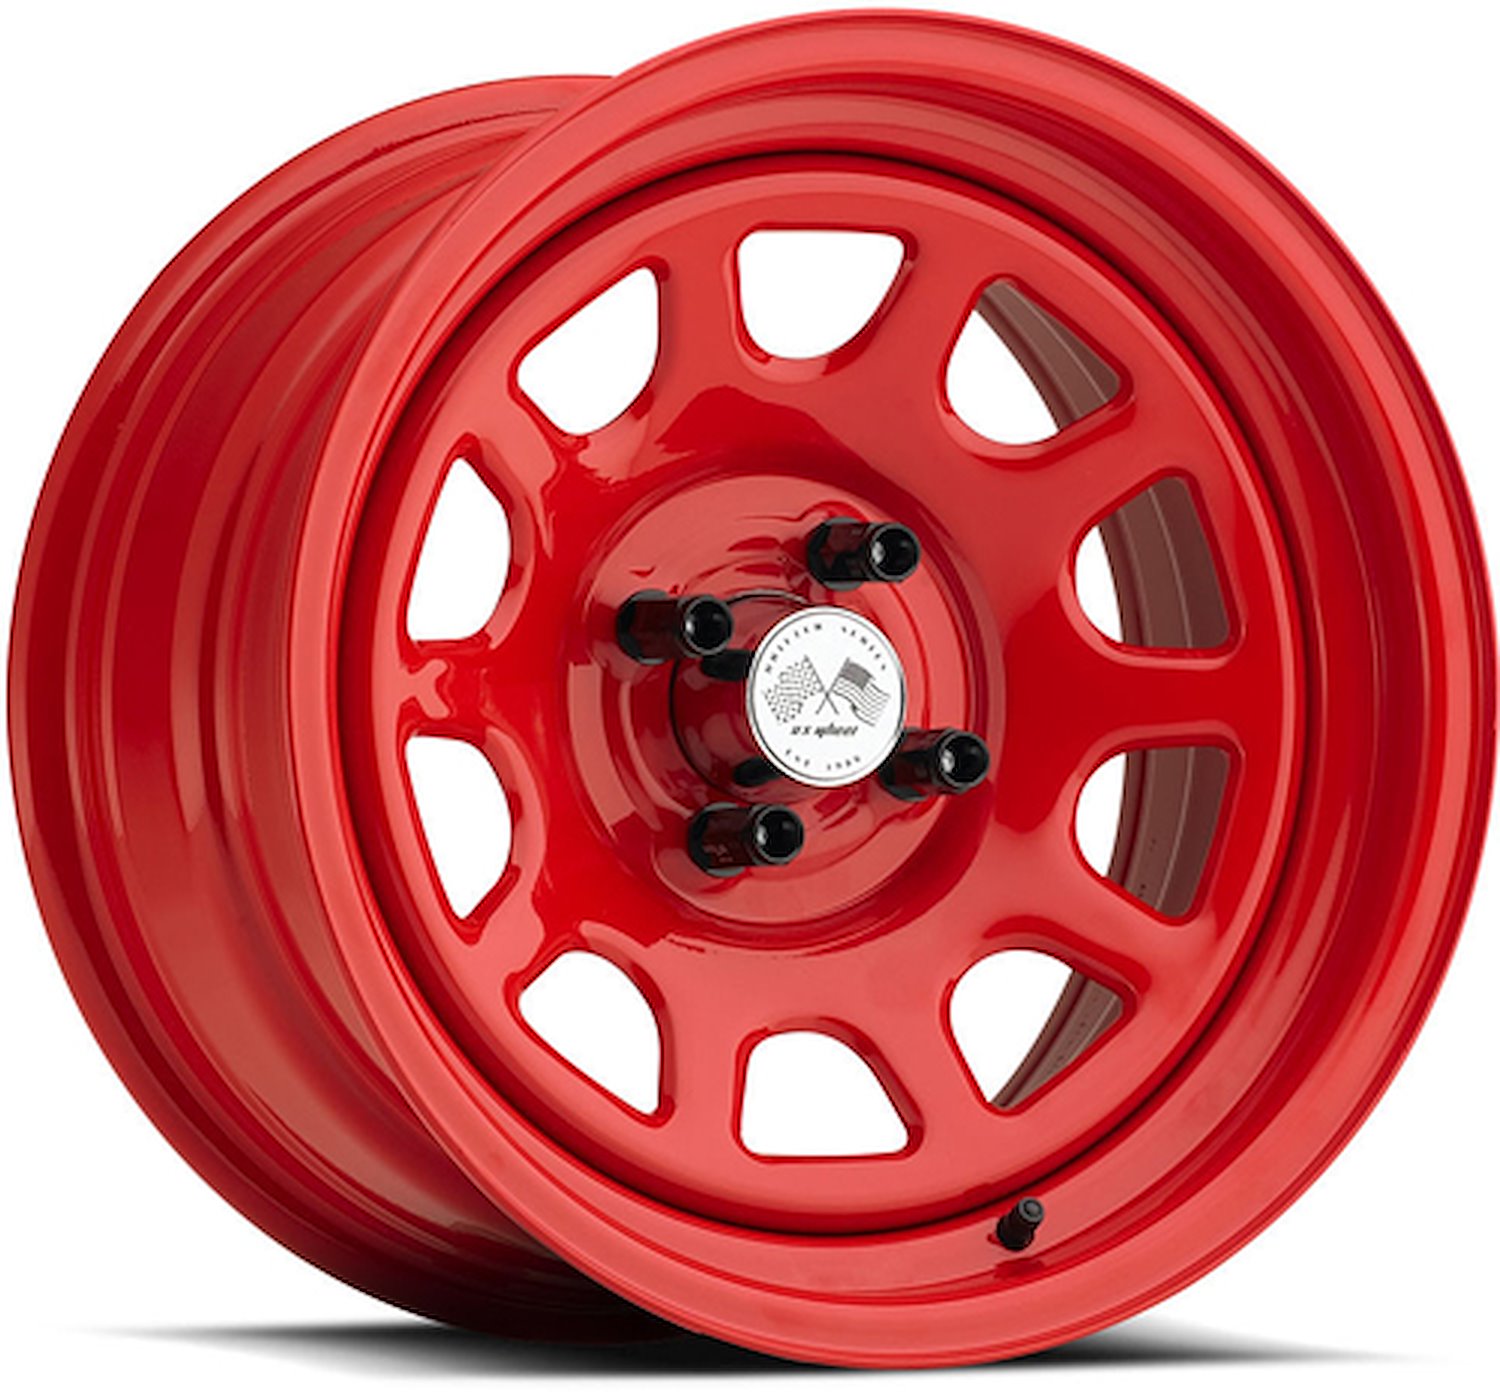 PAINTED DAYTONA FWD DRIFTER RED 15 x 7 4 x 100 Bolt Circle 45 Back Spacing +12 offset 266 Center Bore 1400 lbs Load Rating